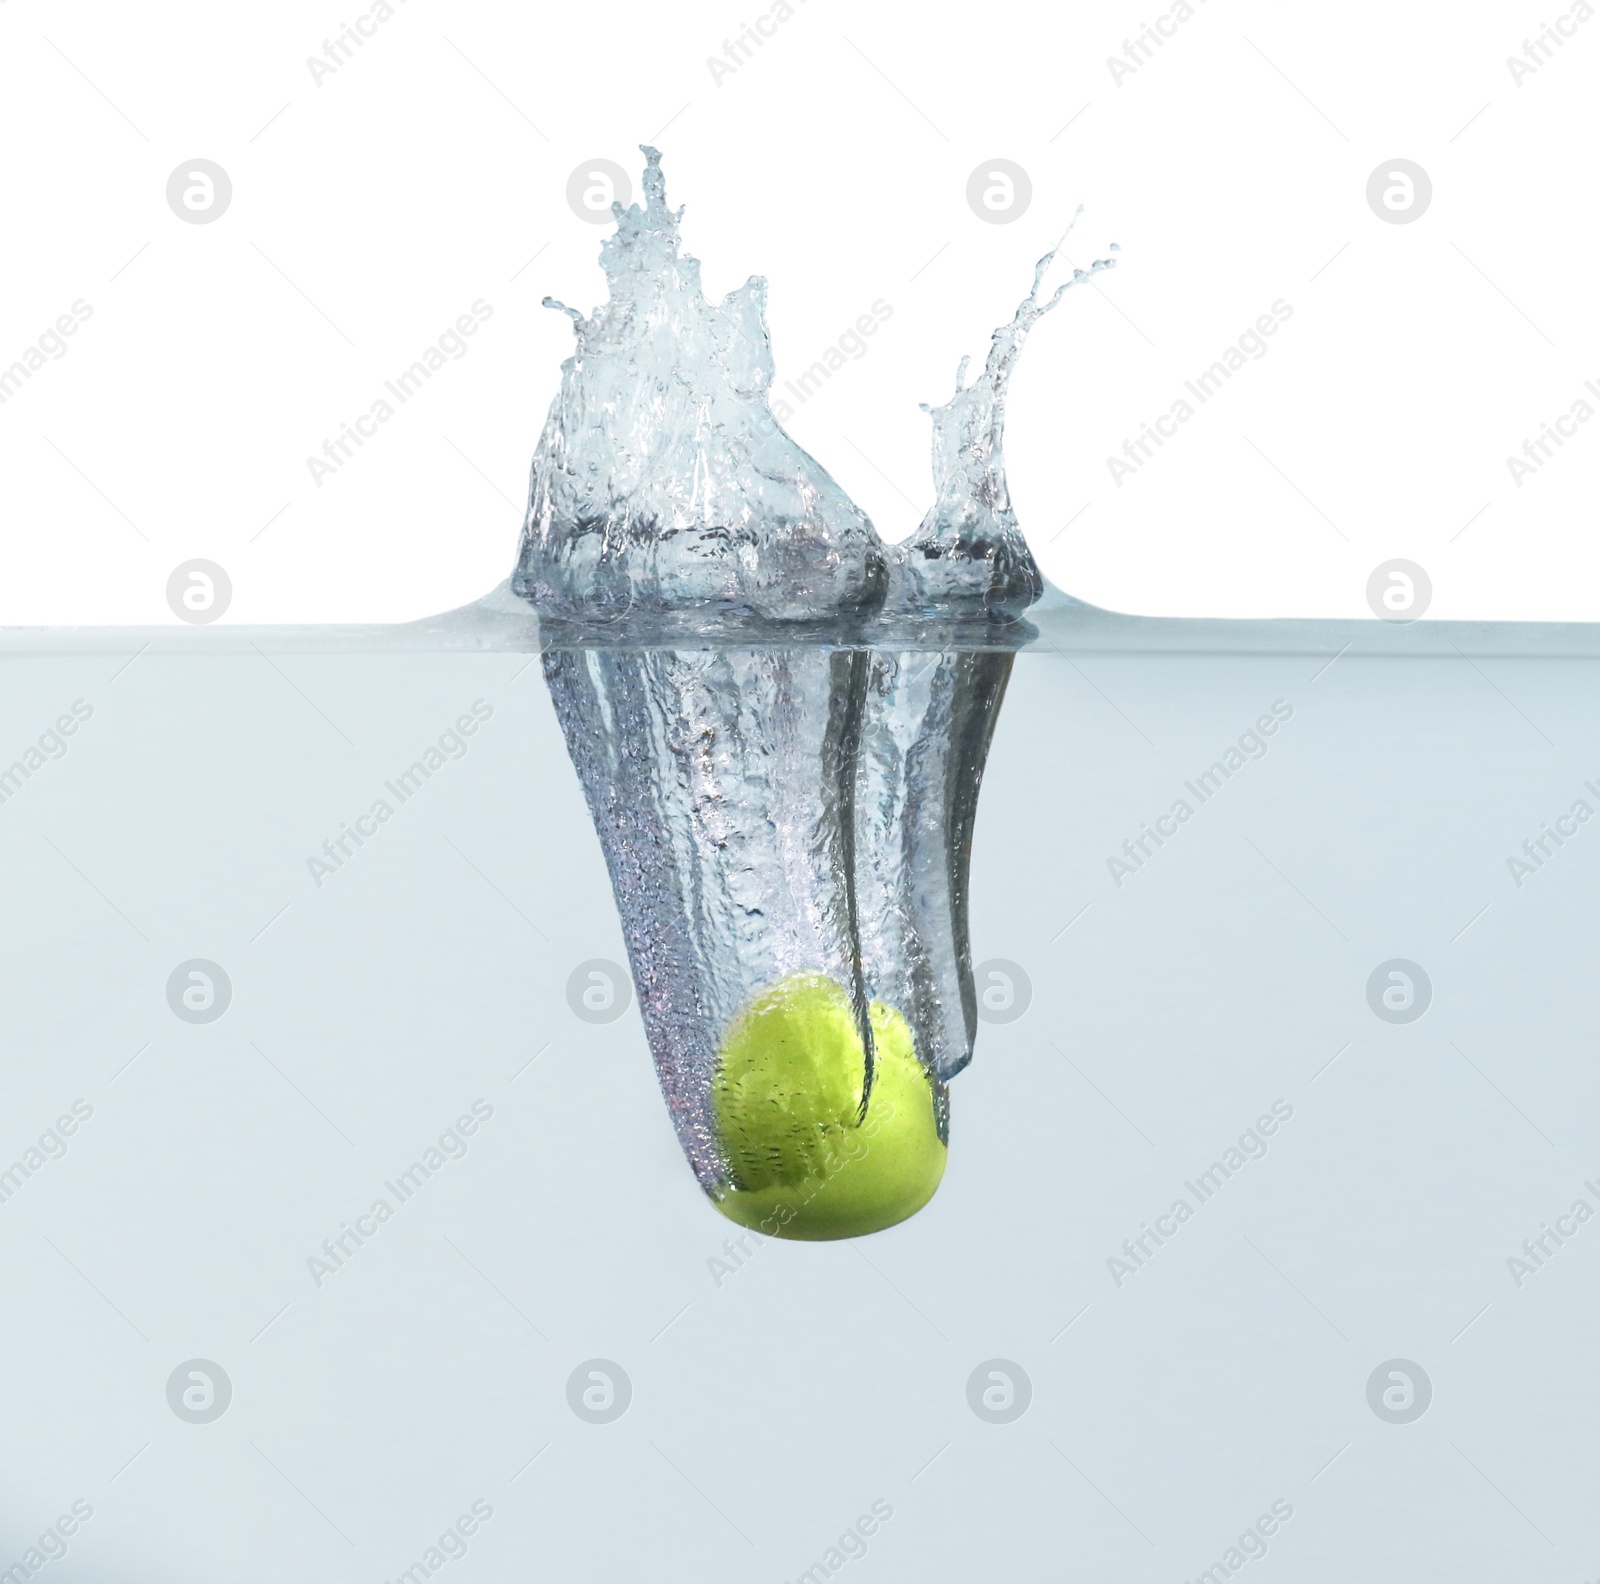 Photo of Ripe green apple falling down into clear water with splashes against white background